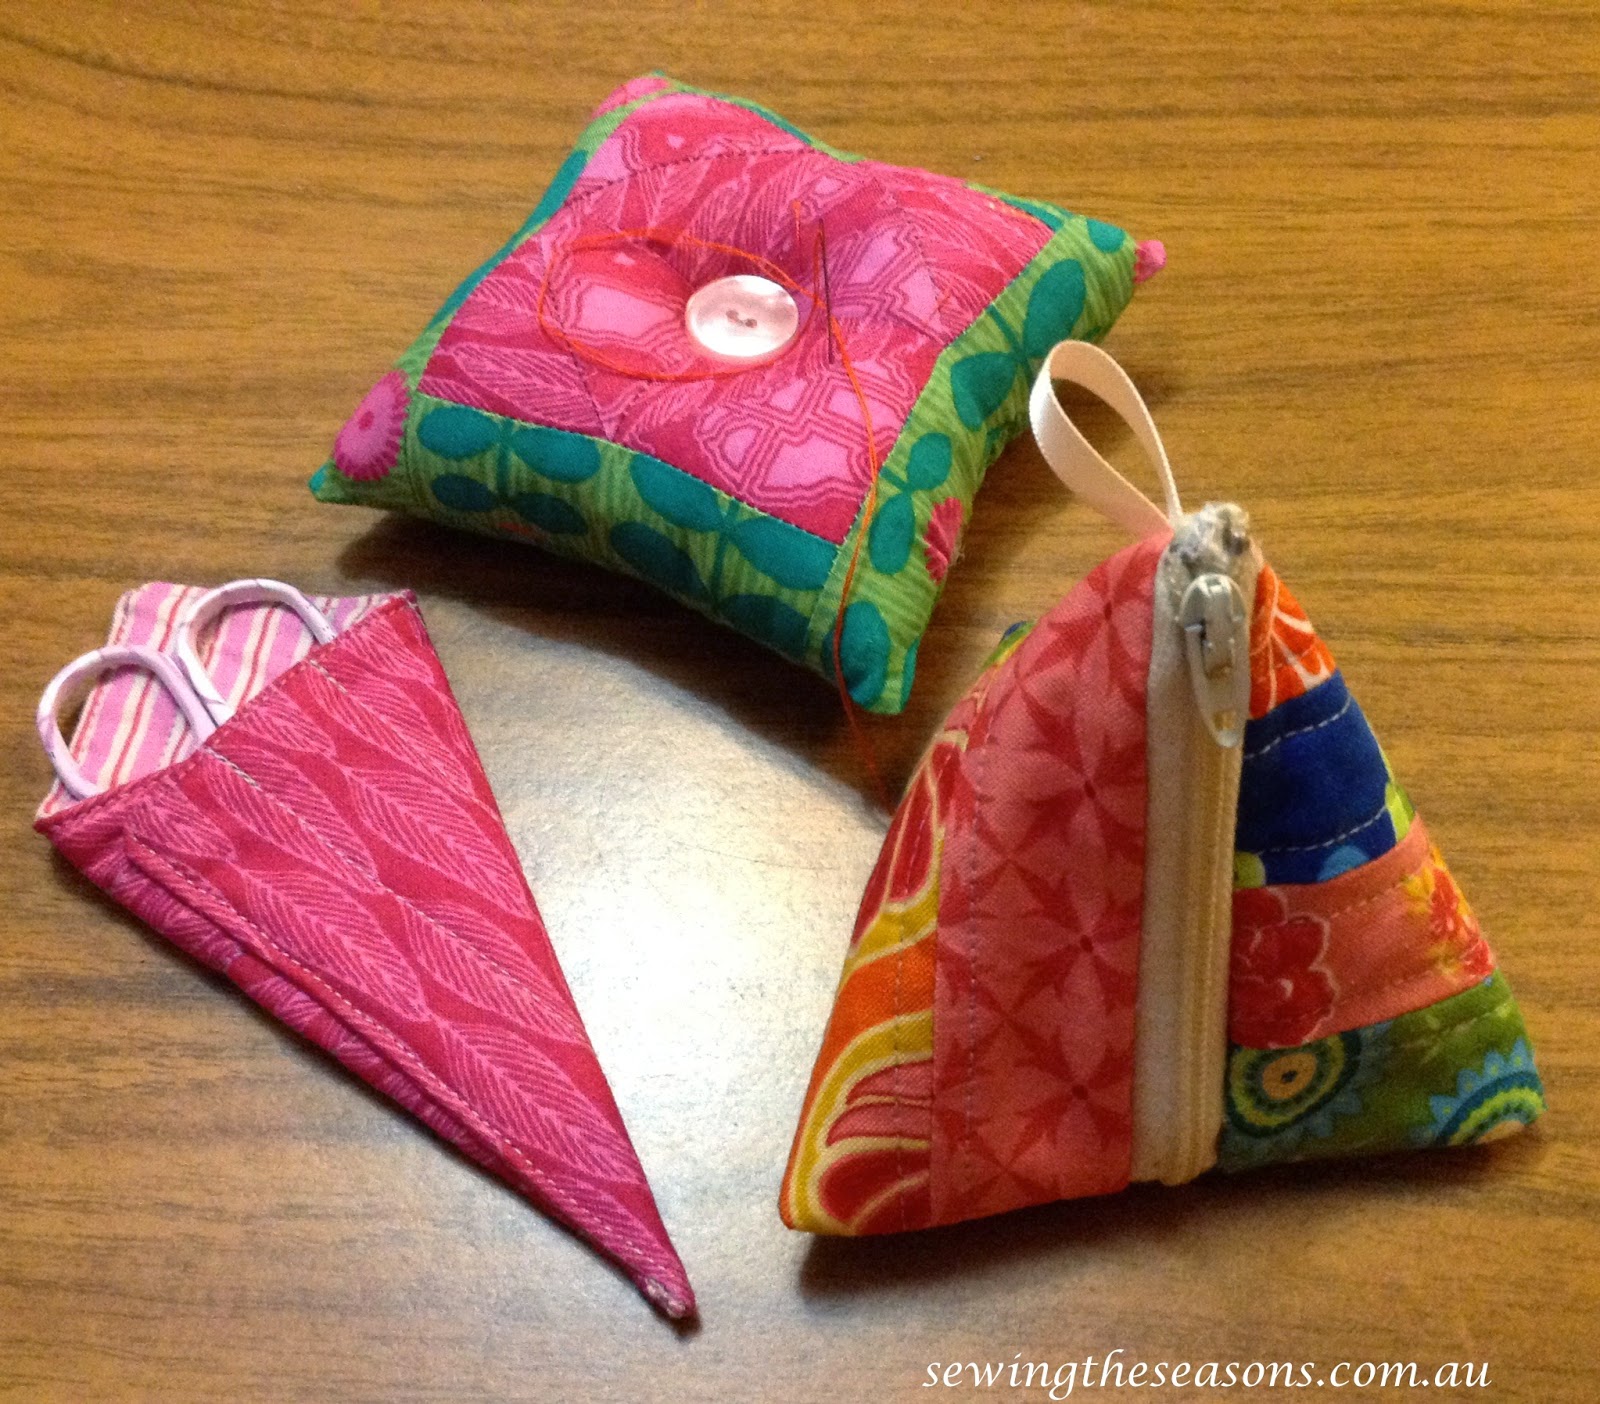 Sewing The Seasons: Quick Sewing Projects to see out the Year